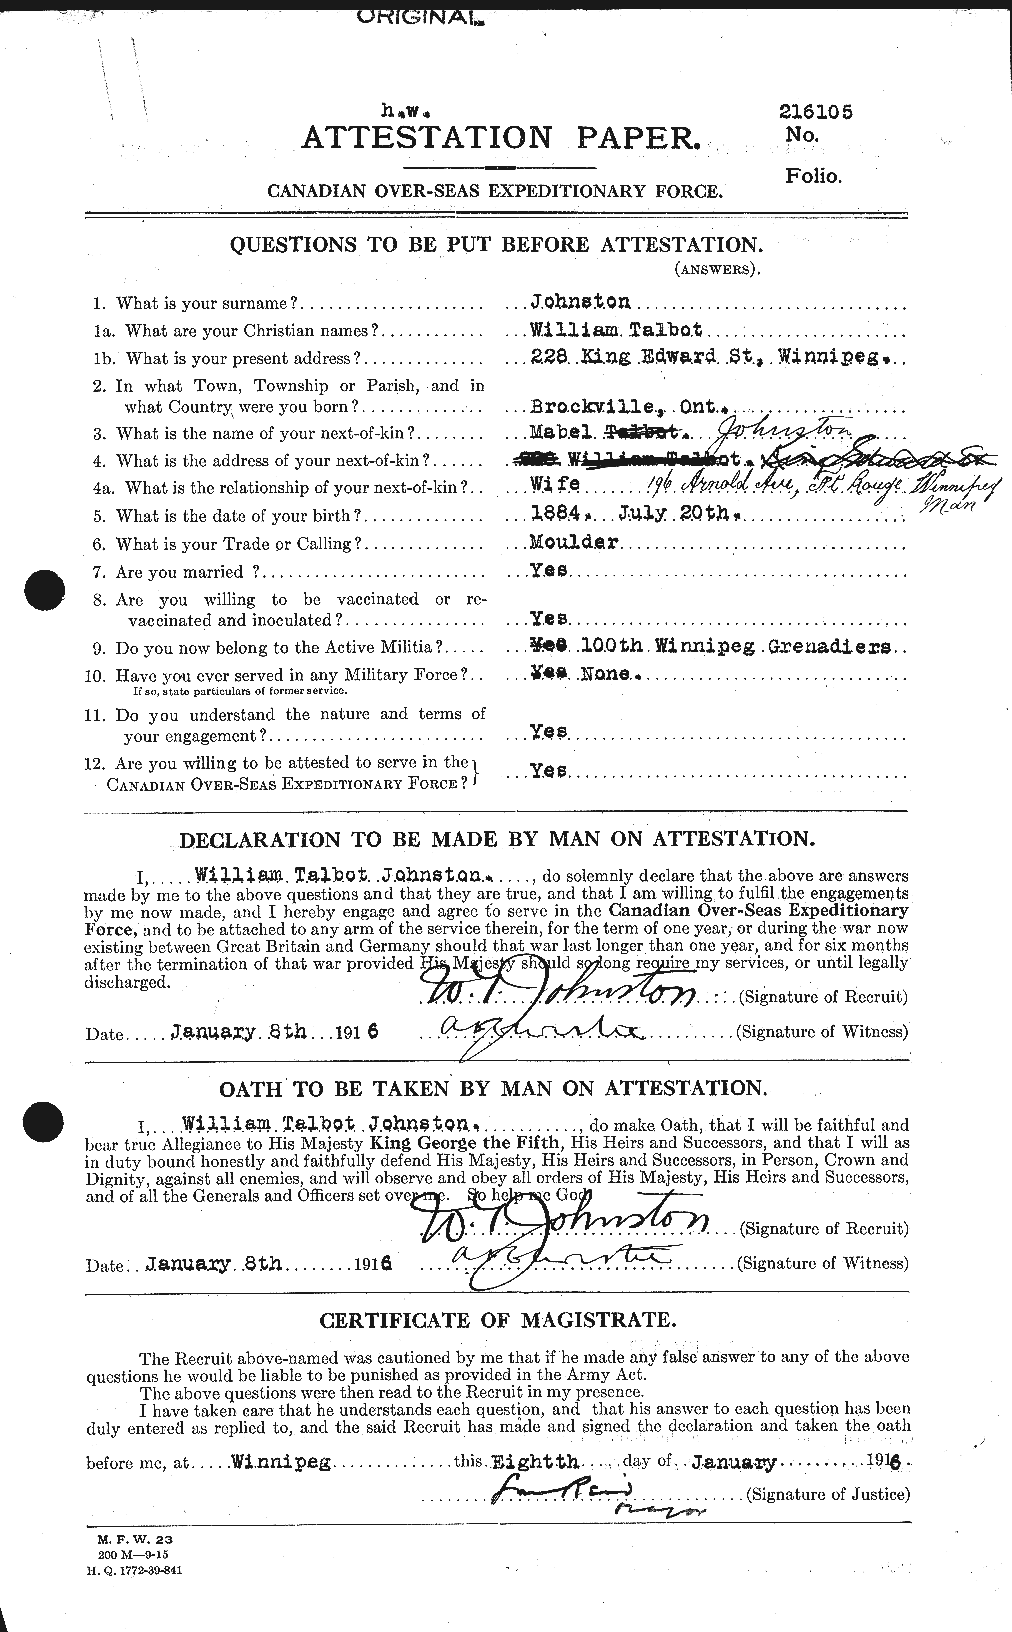 Personnel Records of the First World War - CEF 429622a